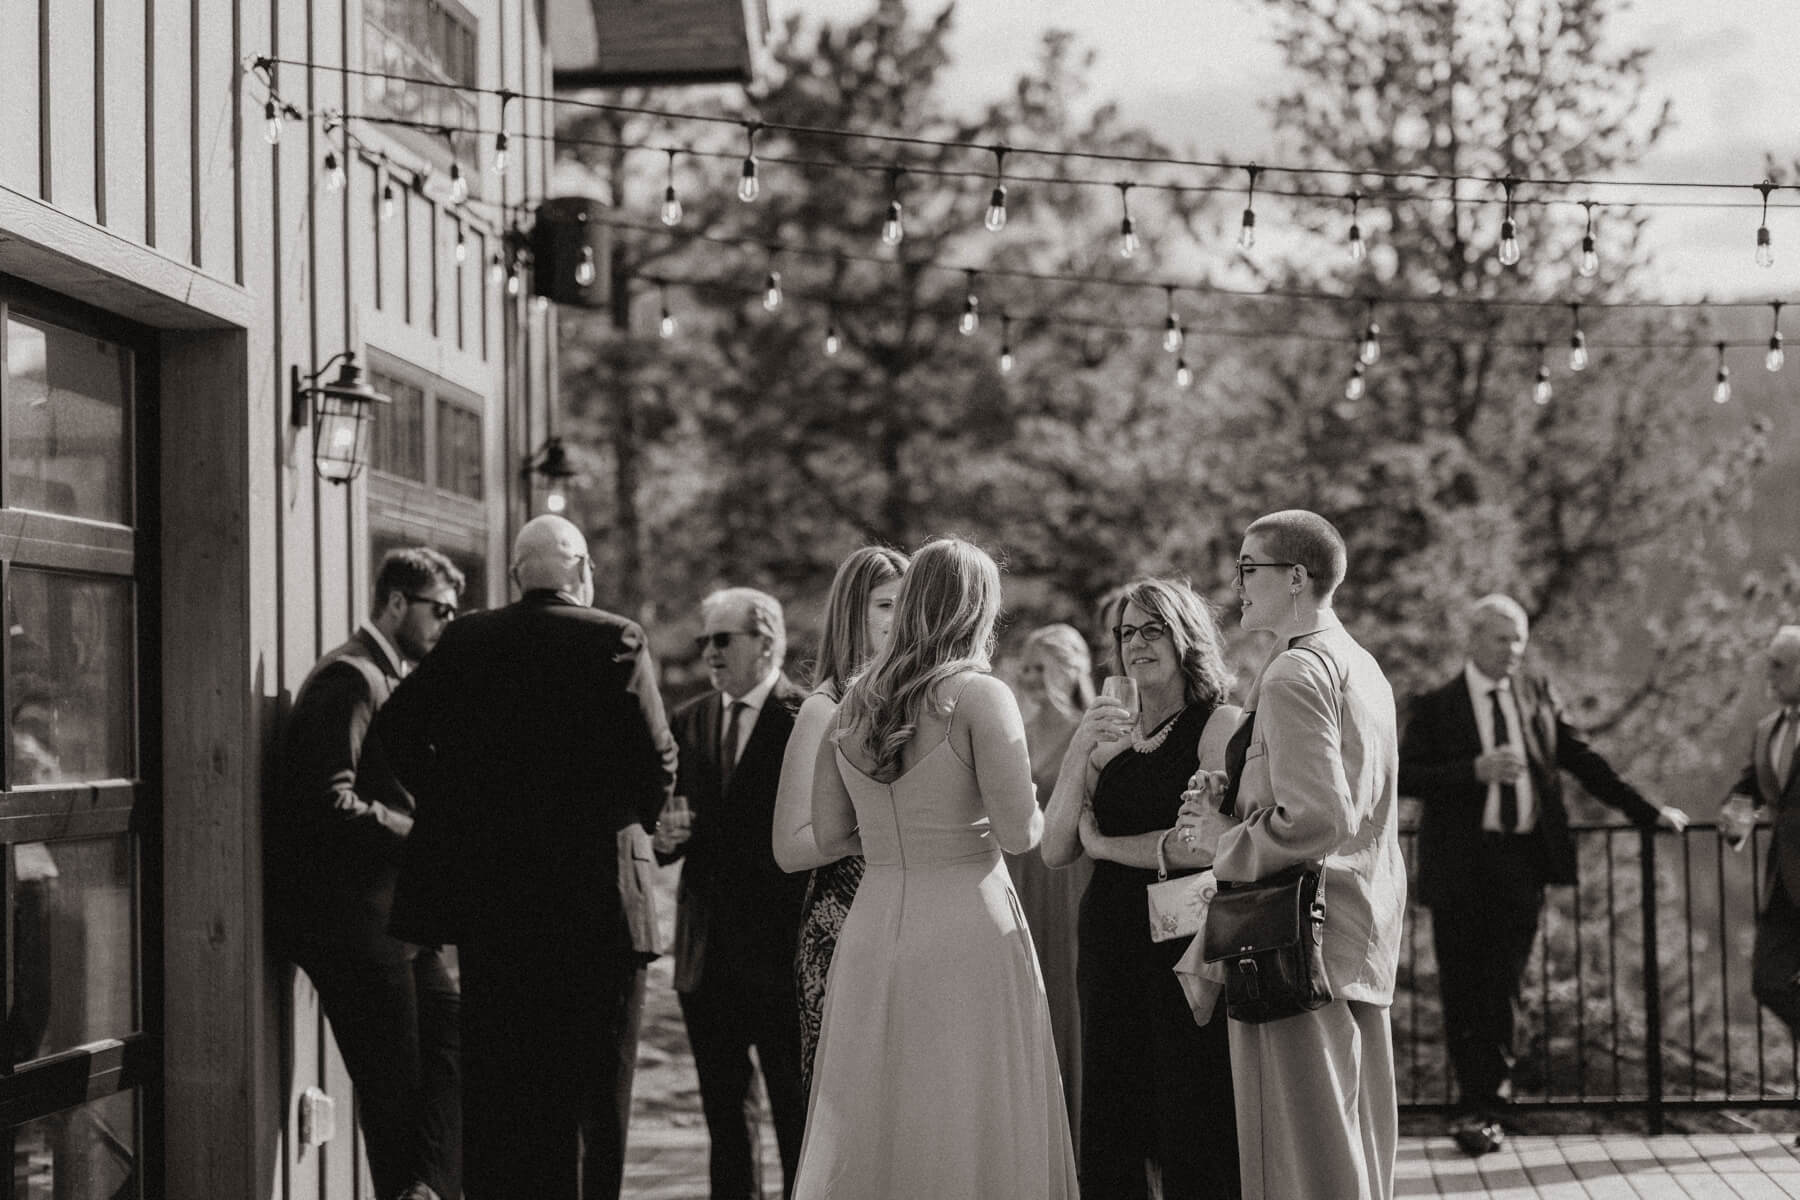 Wedding guests standing outside talking during cocktail hour in post about plus ones at weddings | McArthur Weddings and Events